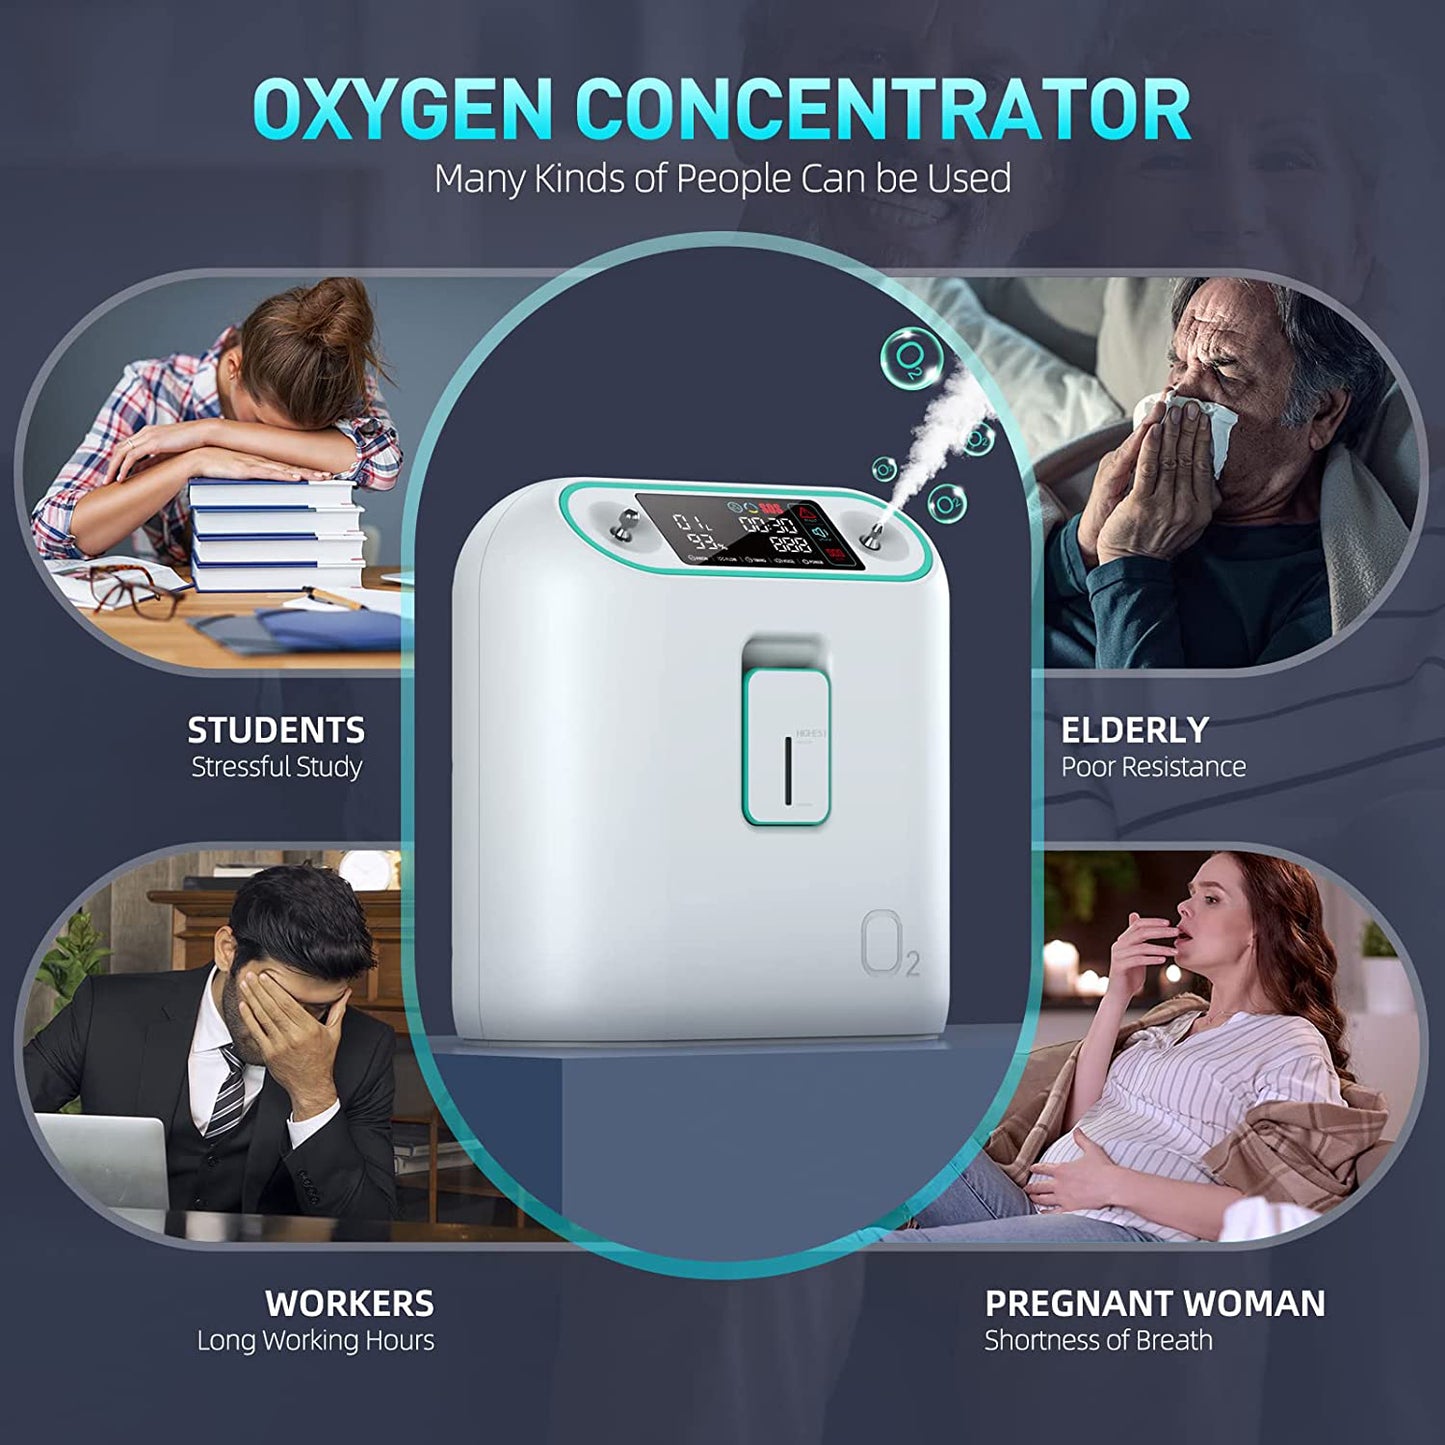 ziqing ZY-01 Oxygen Concentrator With Atomization Adjustable 1L-8L 93% High Concentration Oxygen Generator Low Noise Portable Oxygenerator